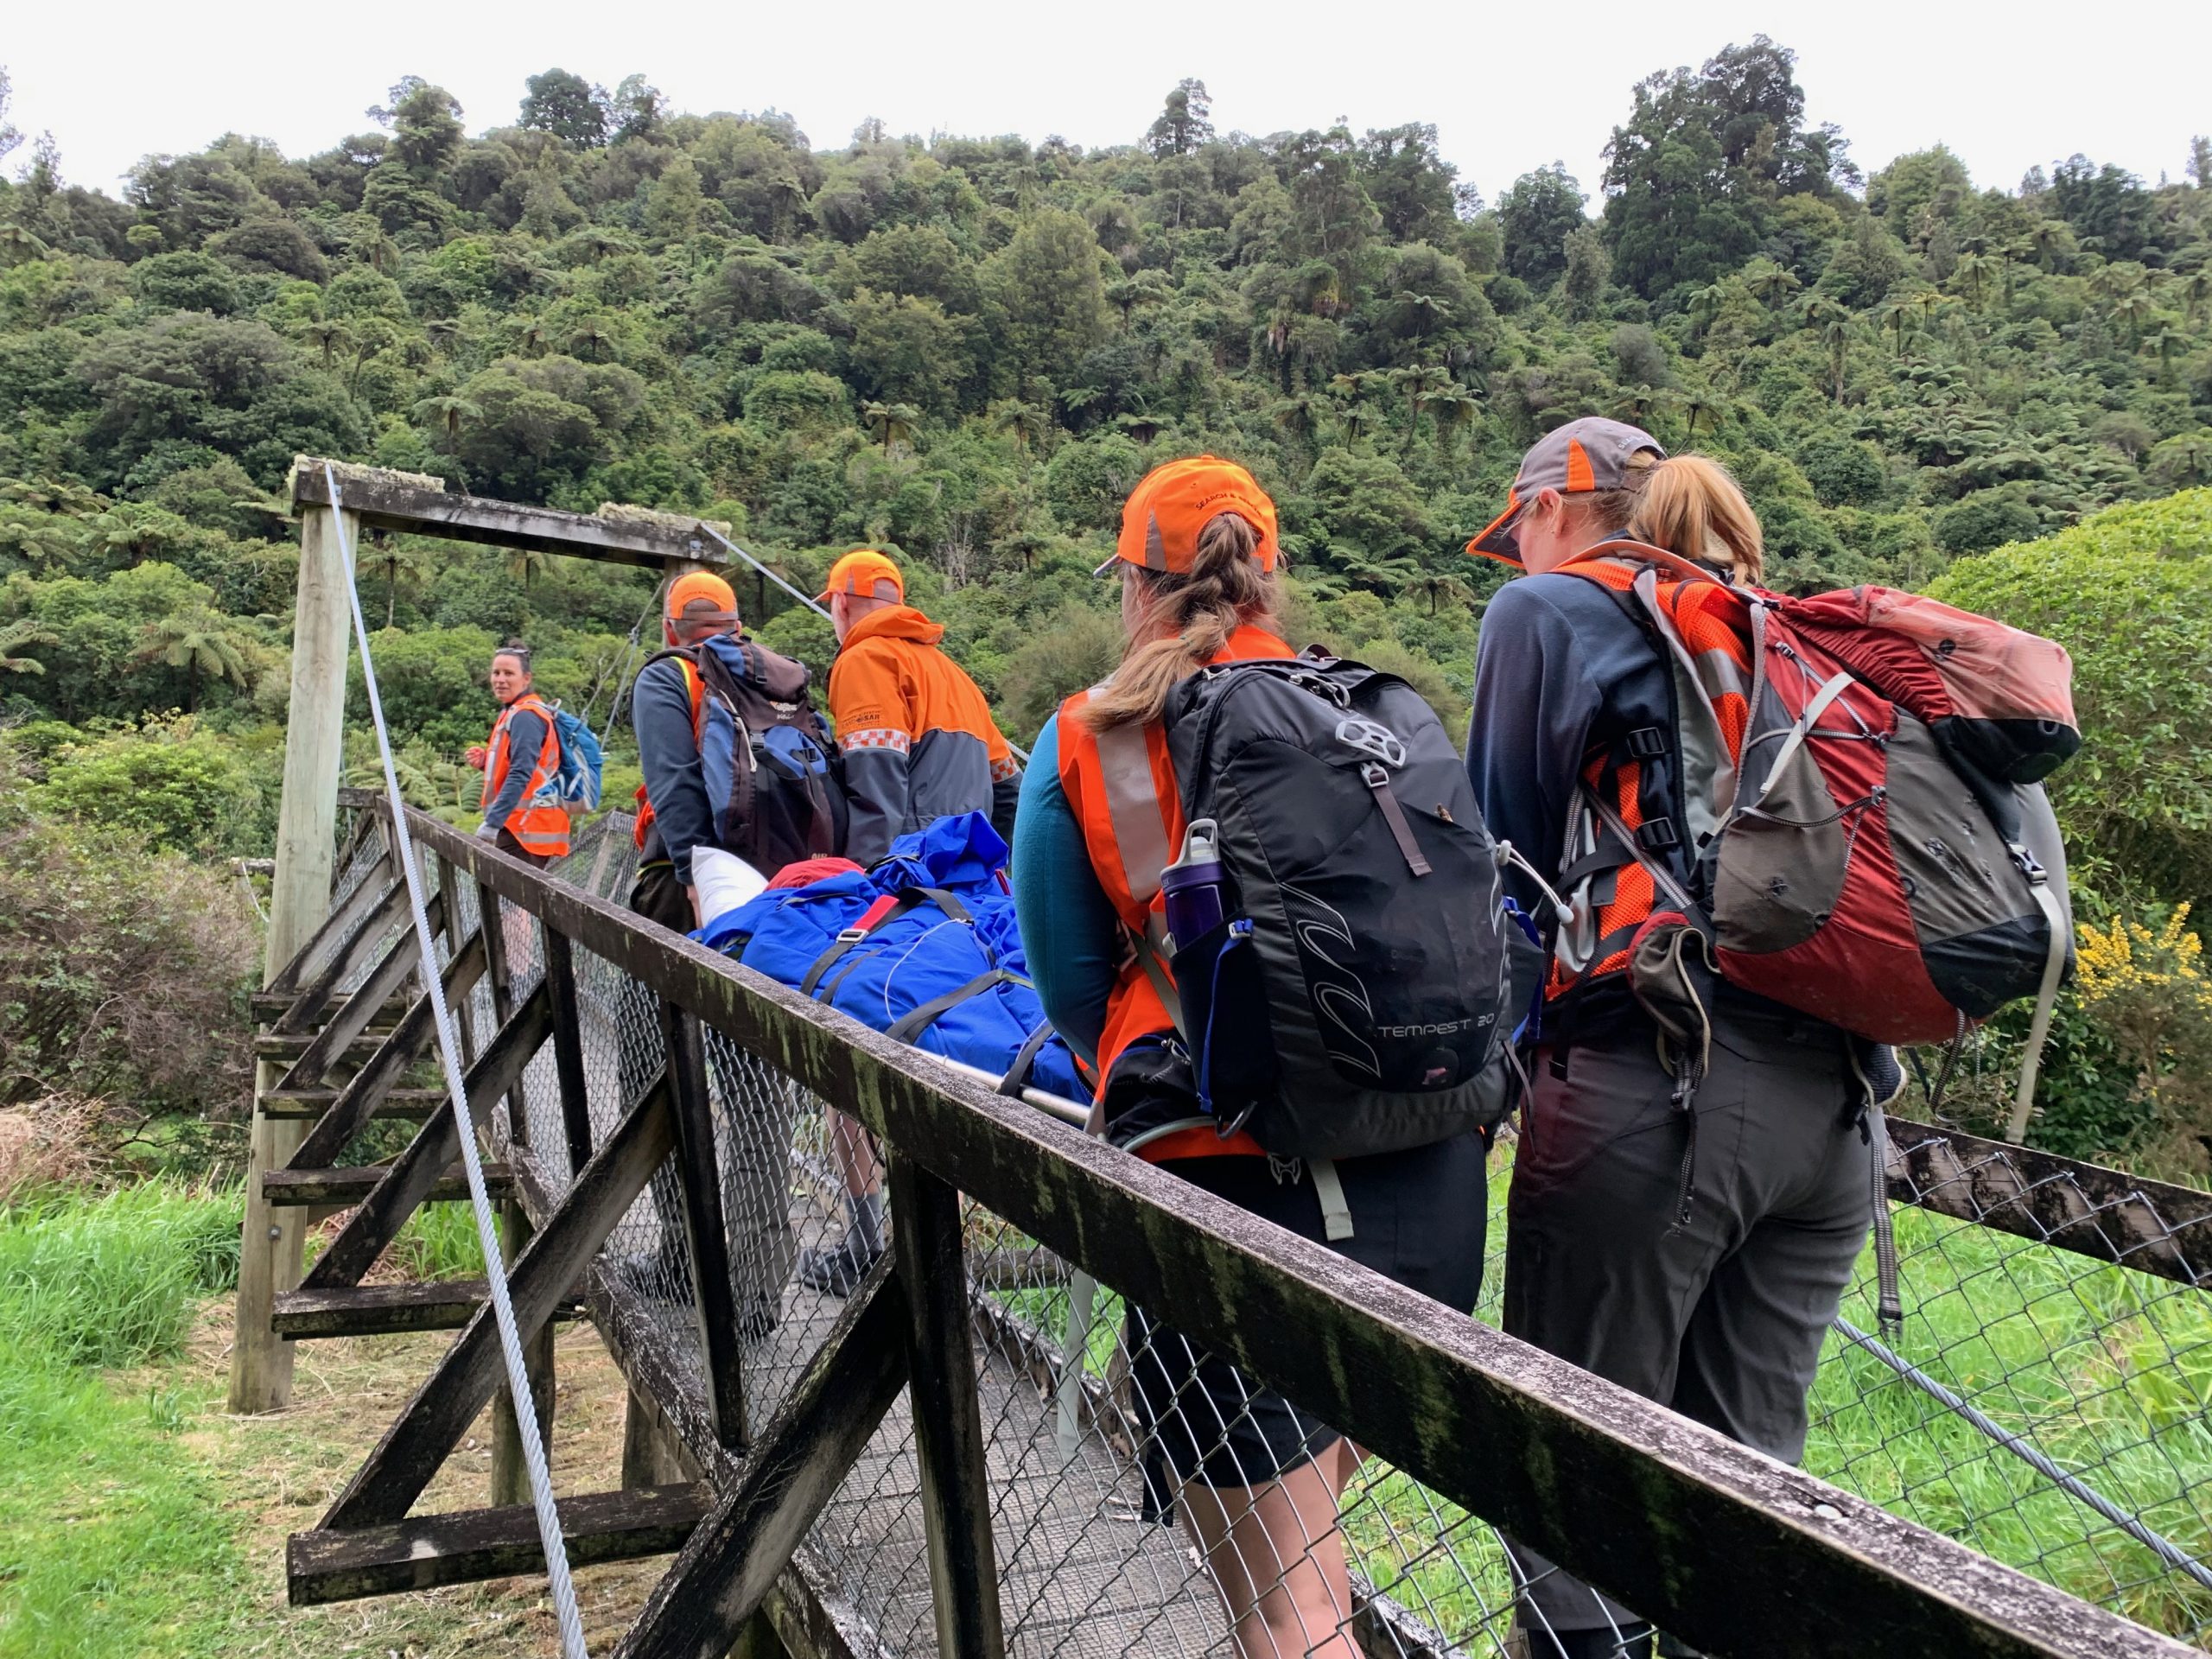 Team of Wellington LandSAR members carrying a patient over a bridge in a stretcher